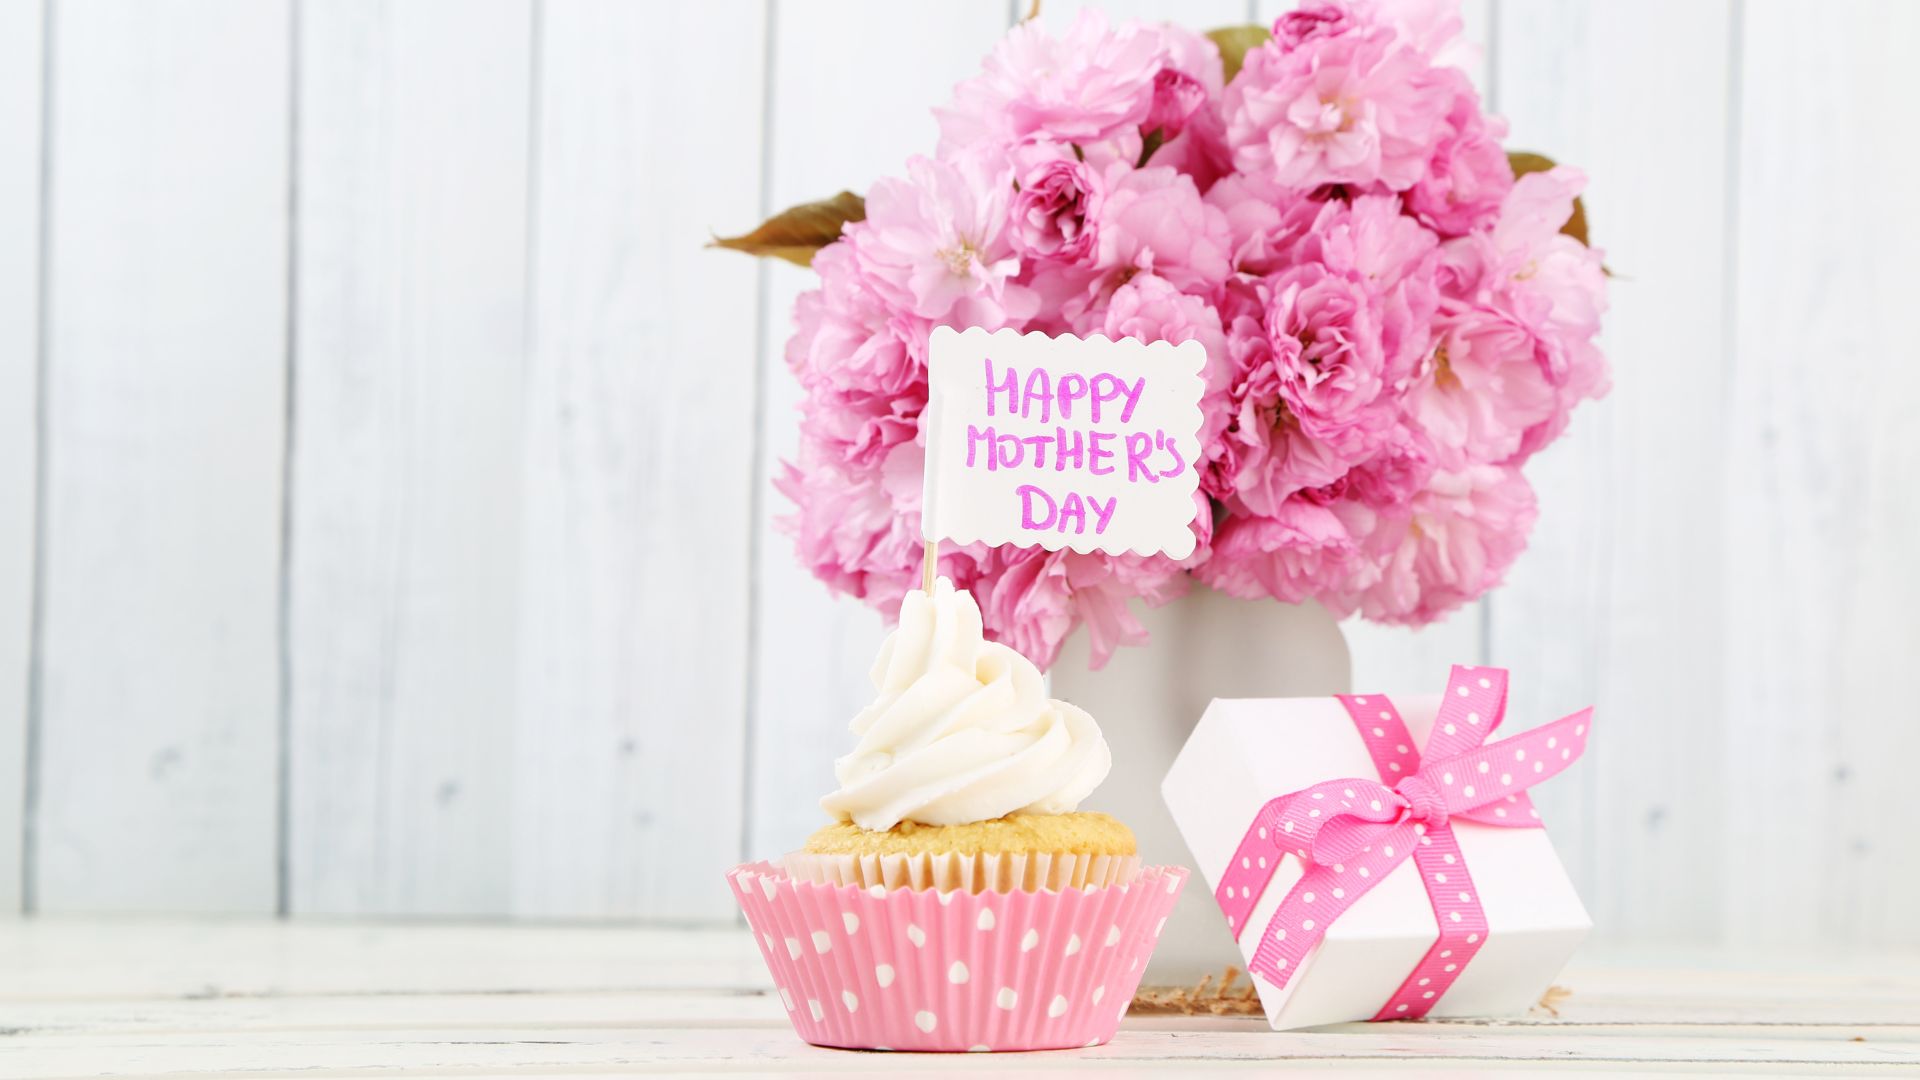 Mother’s Day: 7 Sure-Fire Ways to Maximise Bookings and Revenue